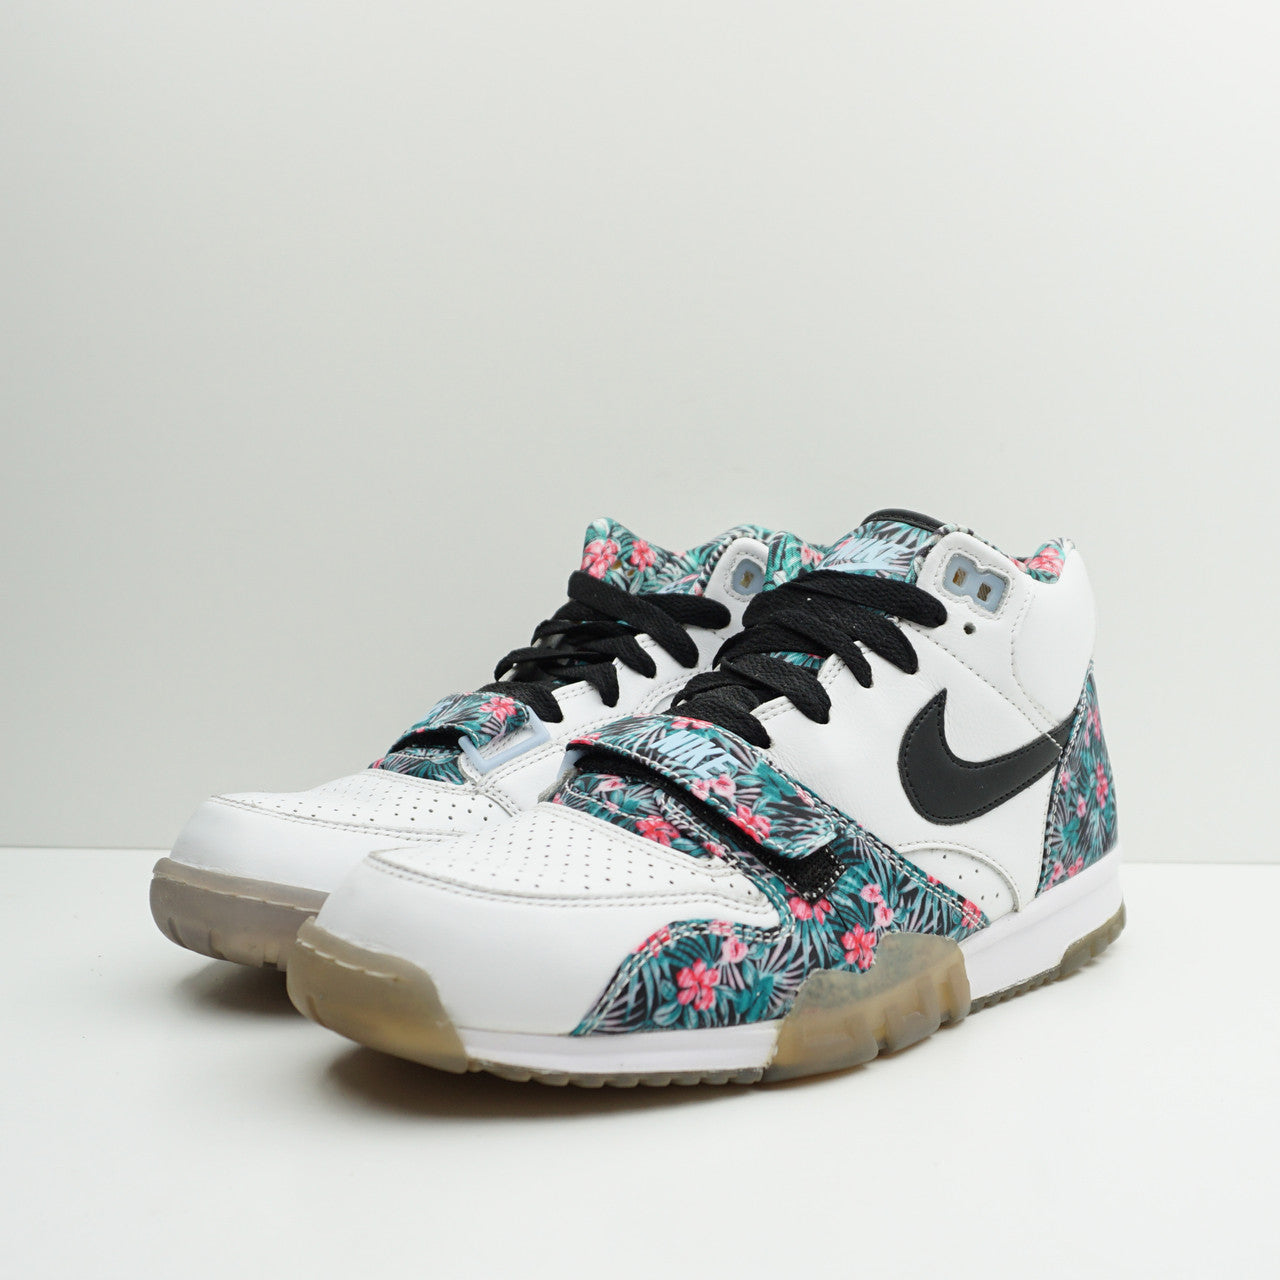 Nike Air Trainer 1 Pro Bowl